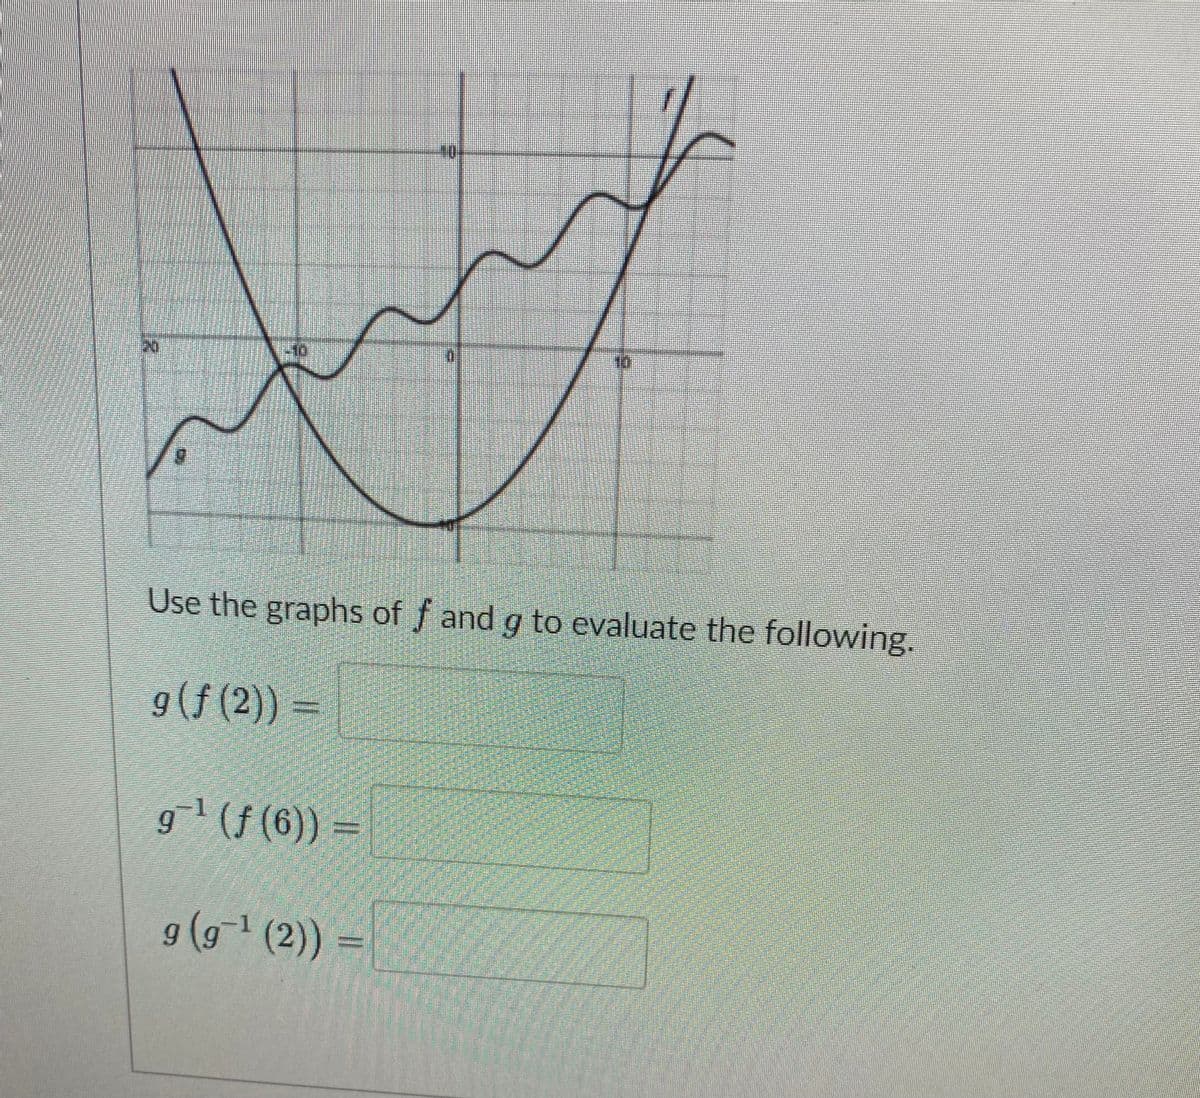 6.
Use the graphs of f and g to evaluate the following.
9(f (2)) =
g1 (f (6)) =
g (9 (2)) =
